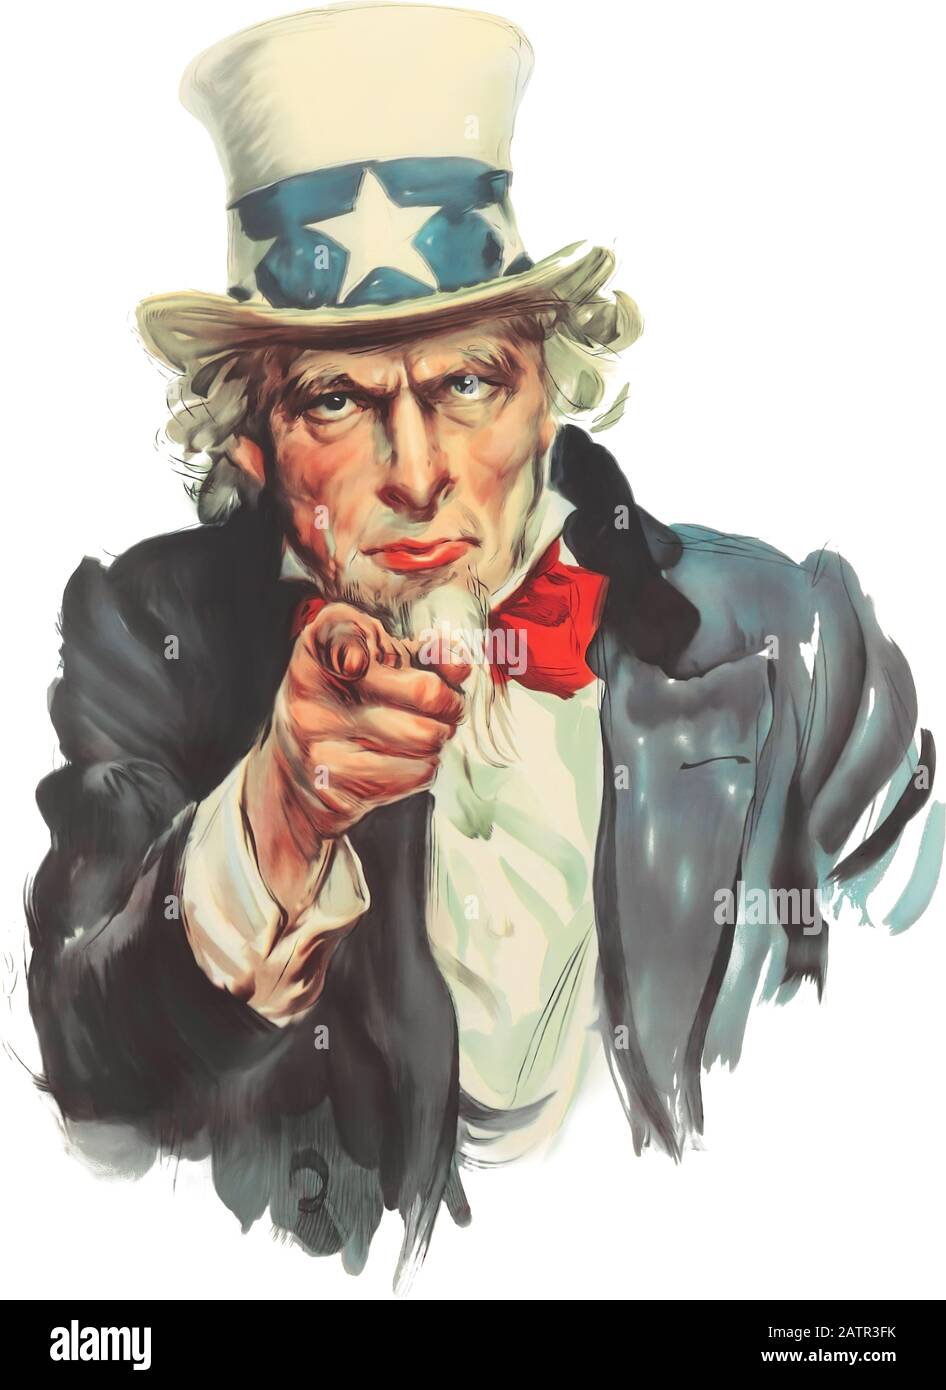 United States of America Uncle Sam mascot classic war army recruiting poster and messaging military, American, heritage history clean and restored Stock Photo